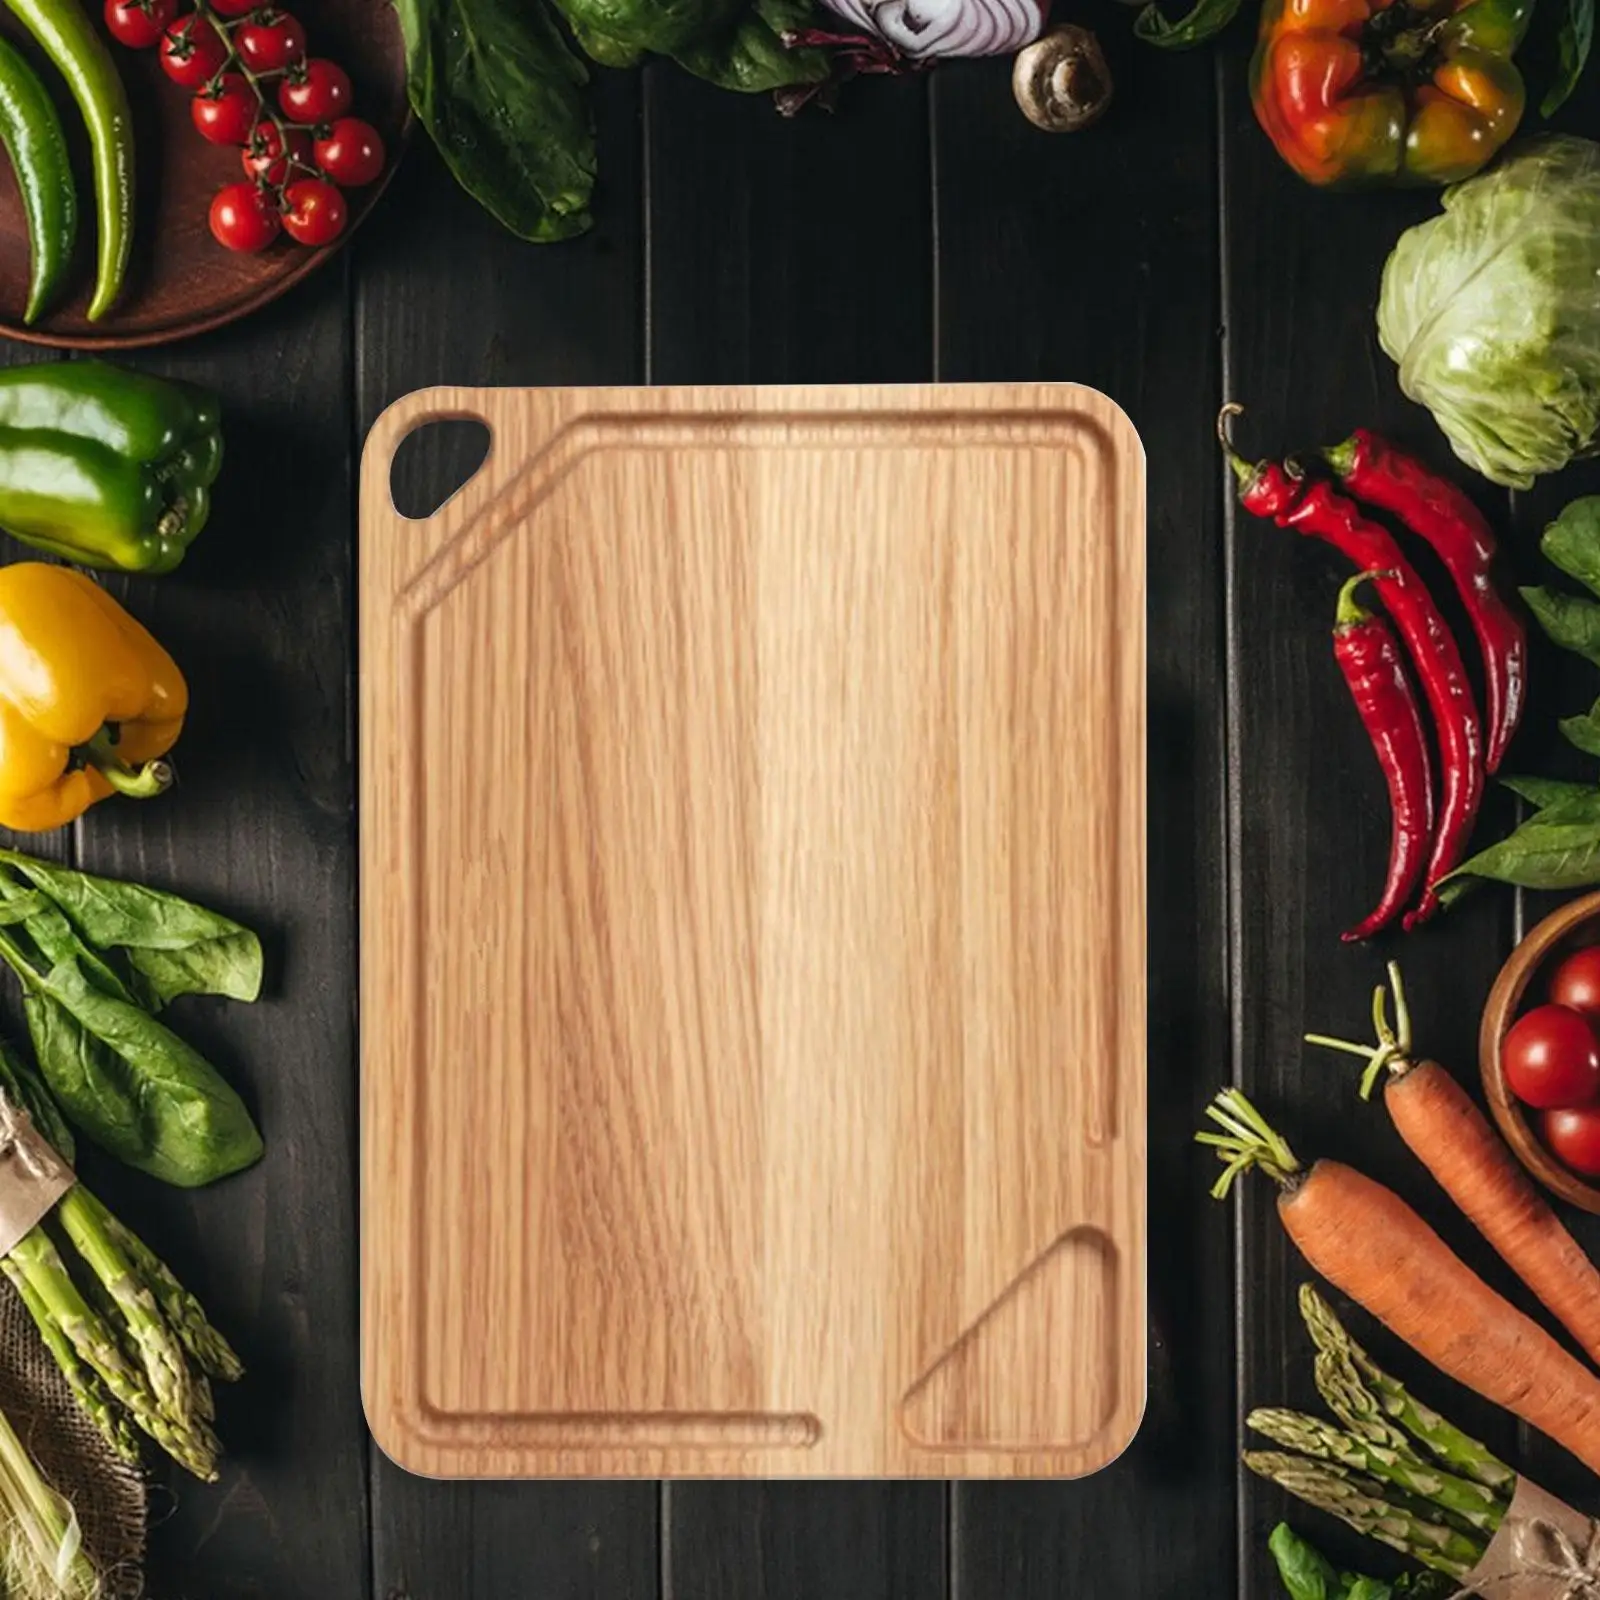 Wooden Cutting Board Kitchen Baking Utensils Chopping Blocks Pizza Tray Bread Tray Multipurpose Food Tray for Fruits Vegetables